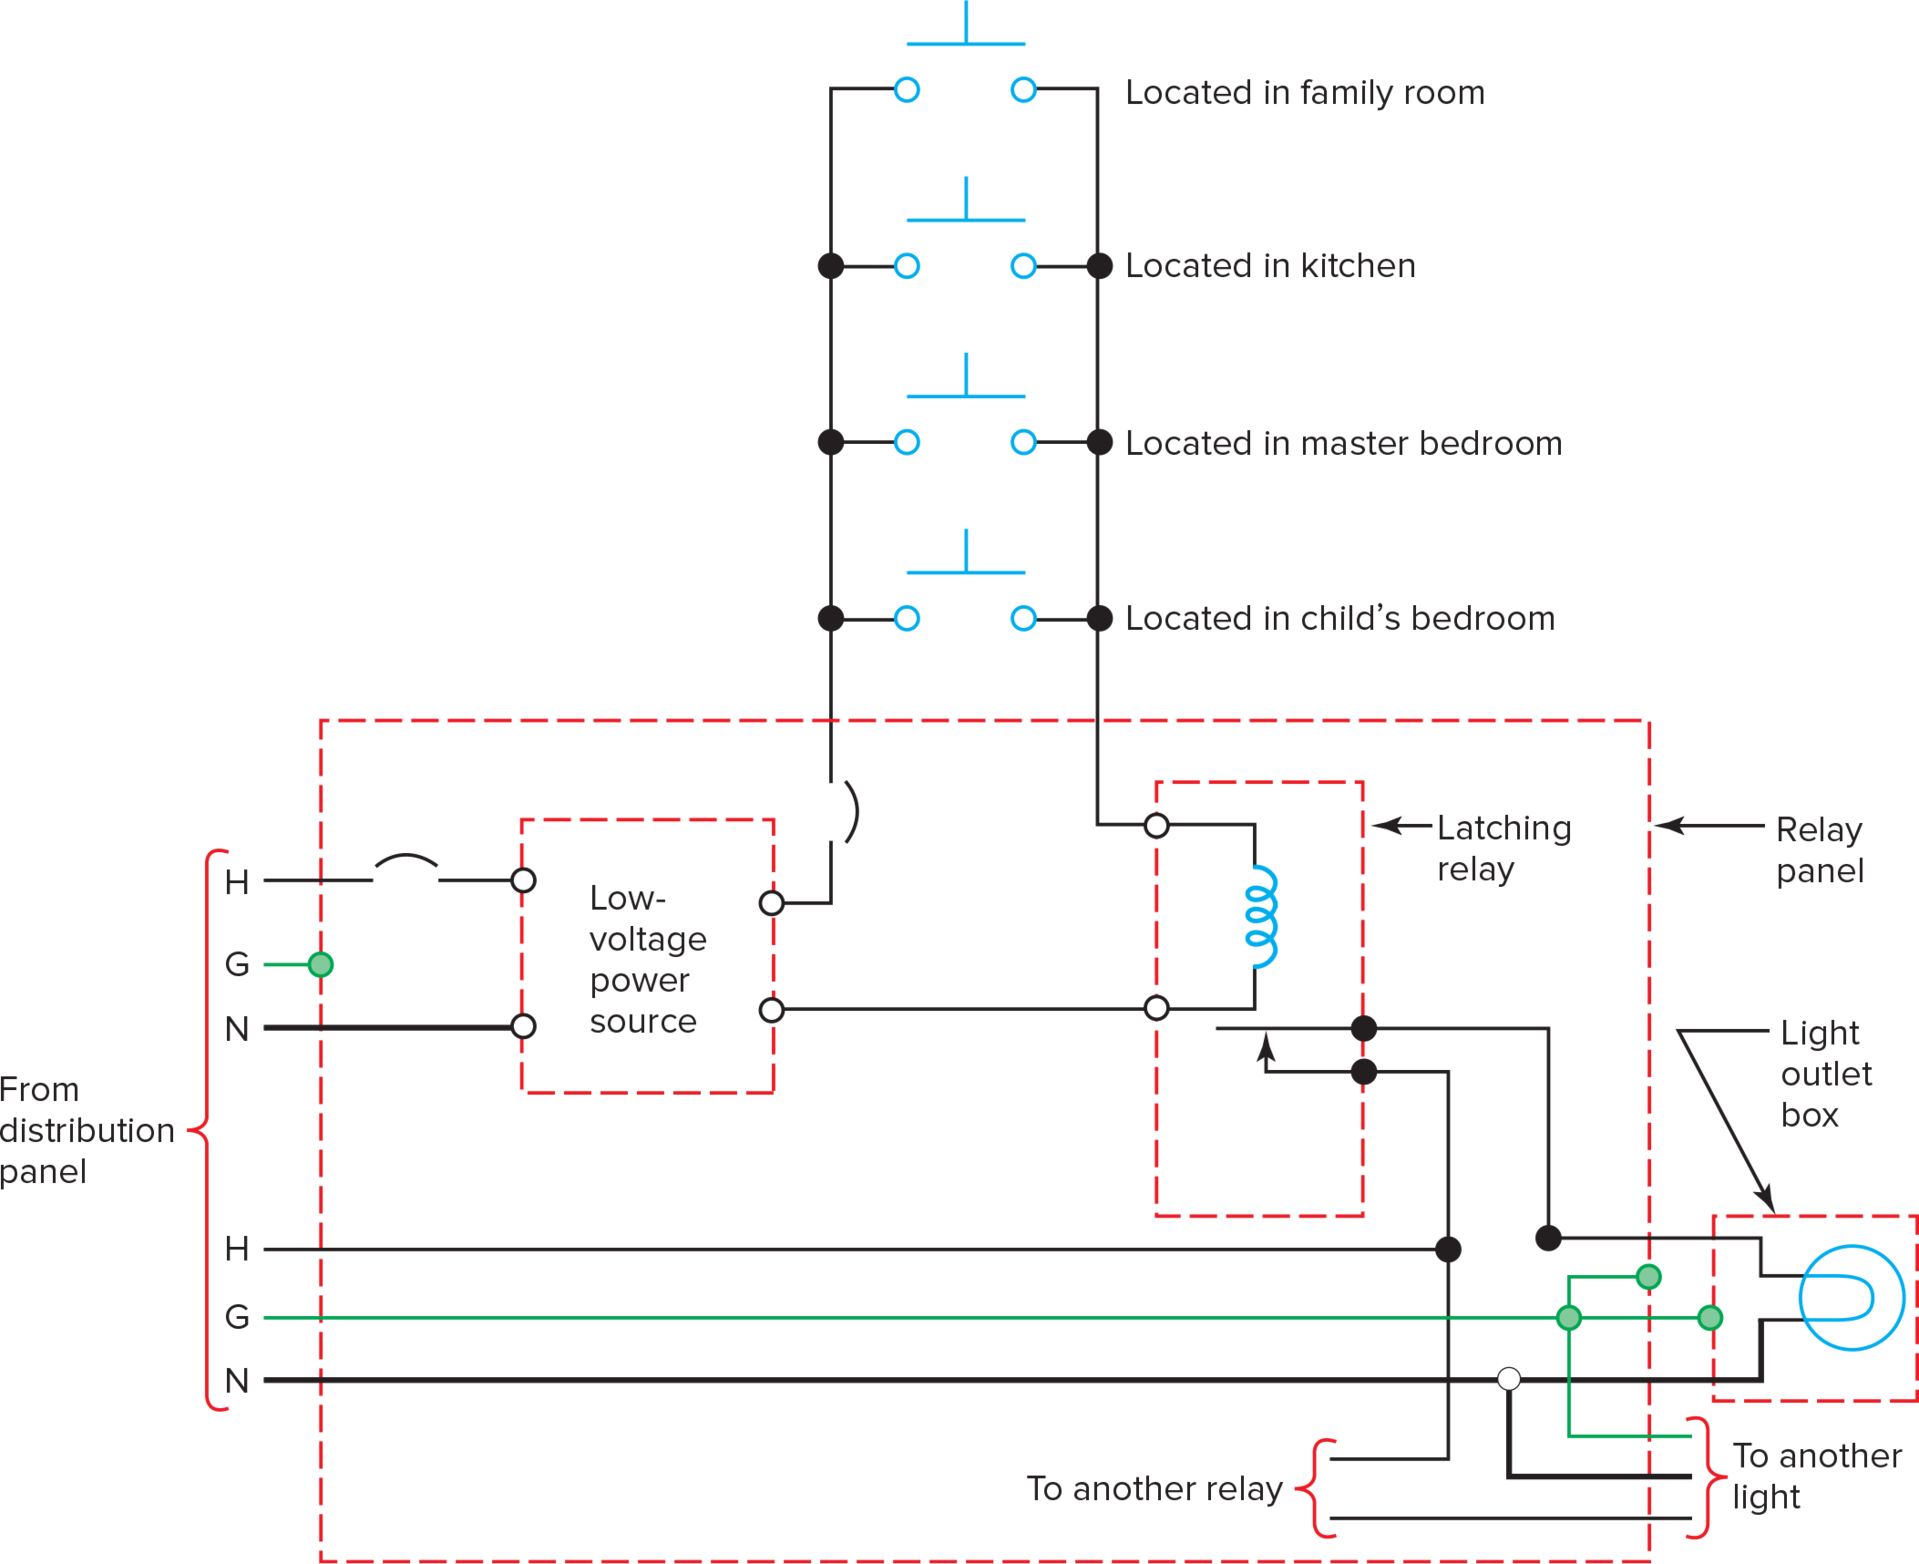 Multipoint control of a low-voltage controlled lamp.